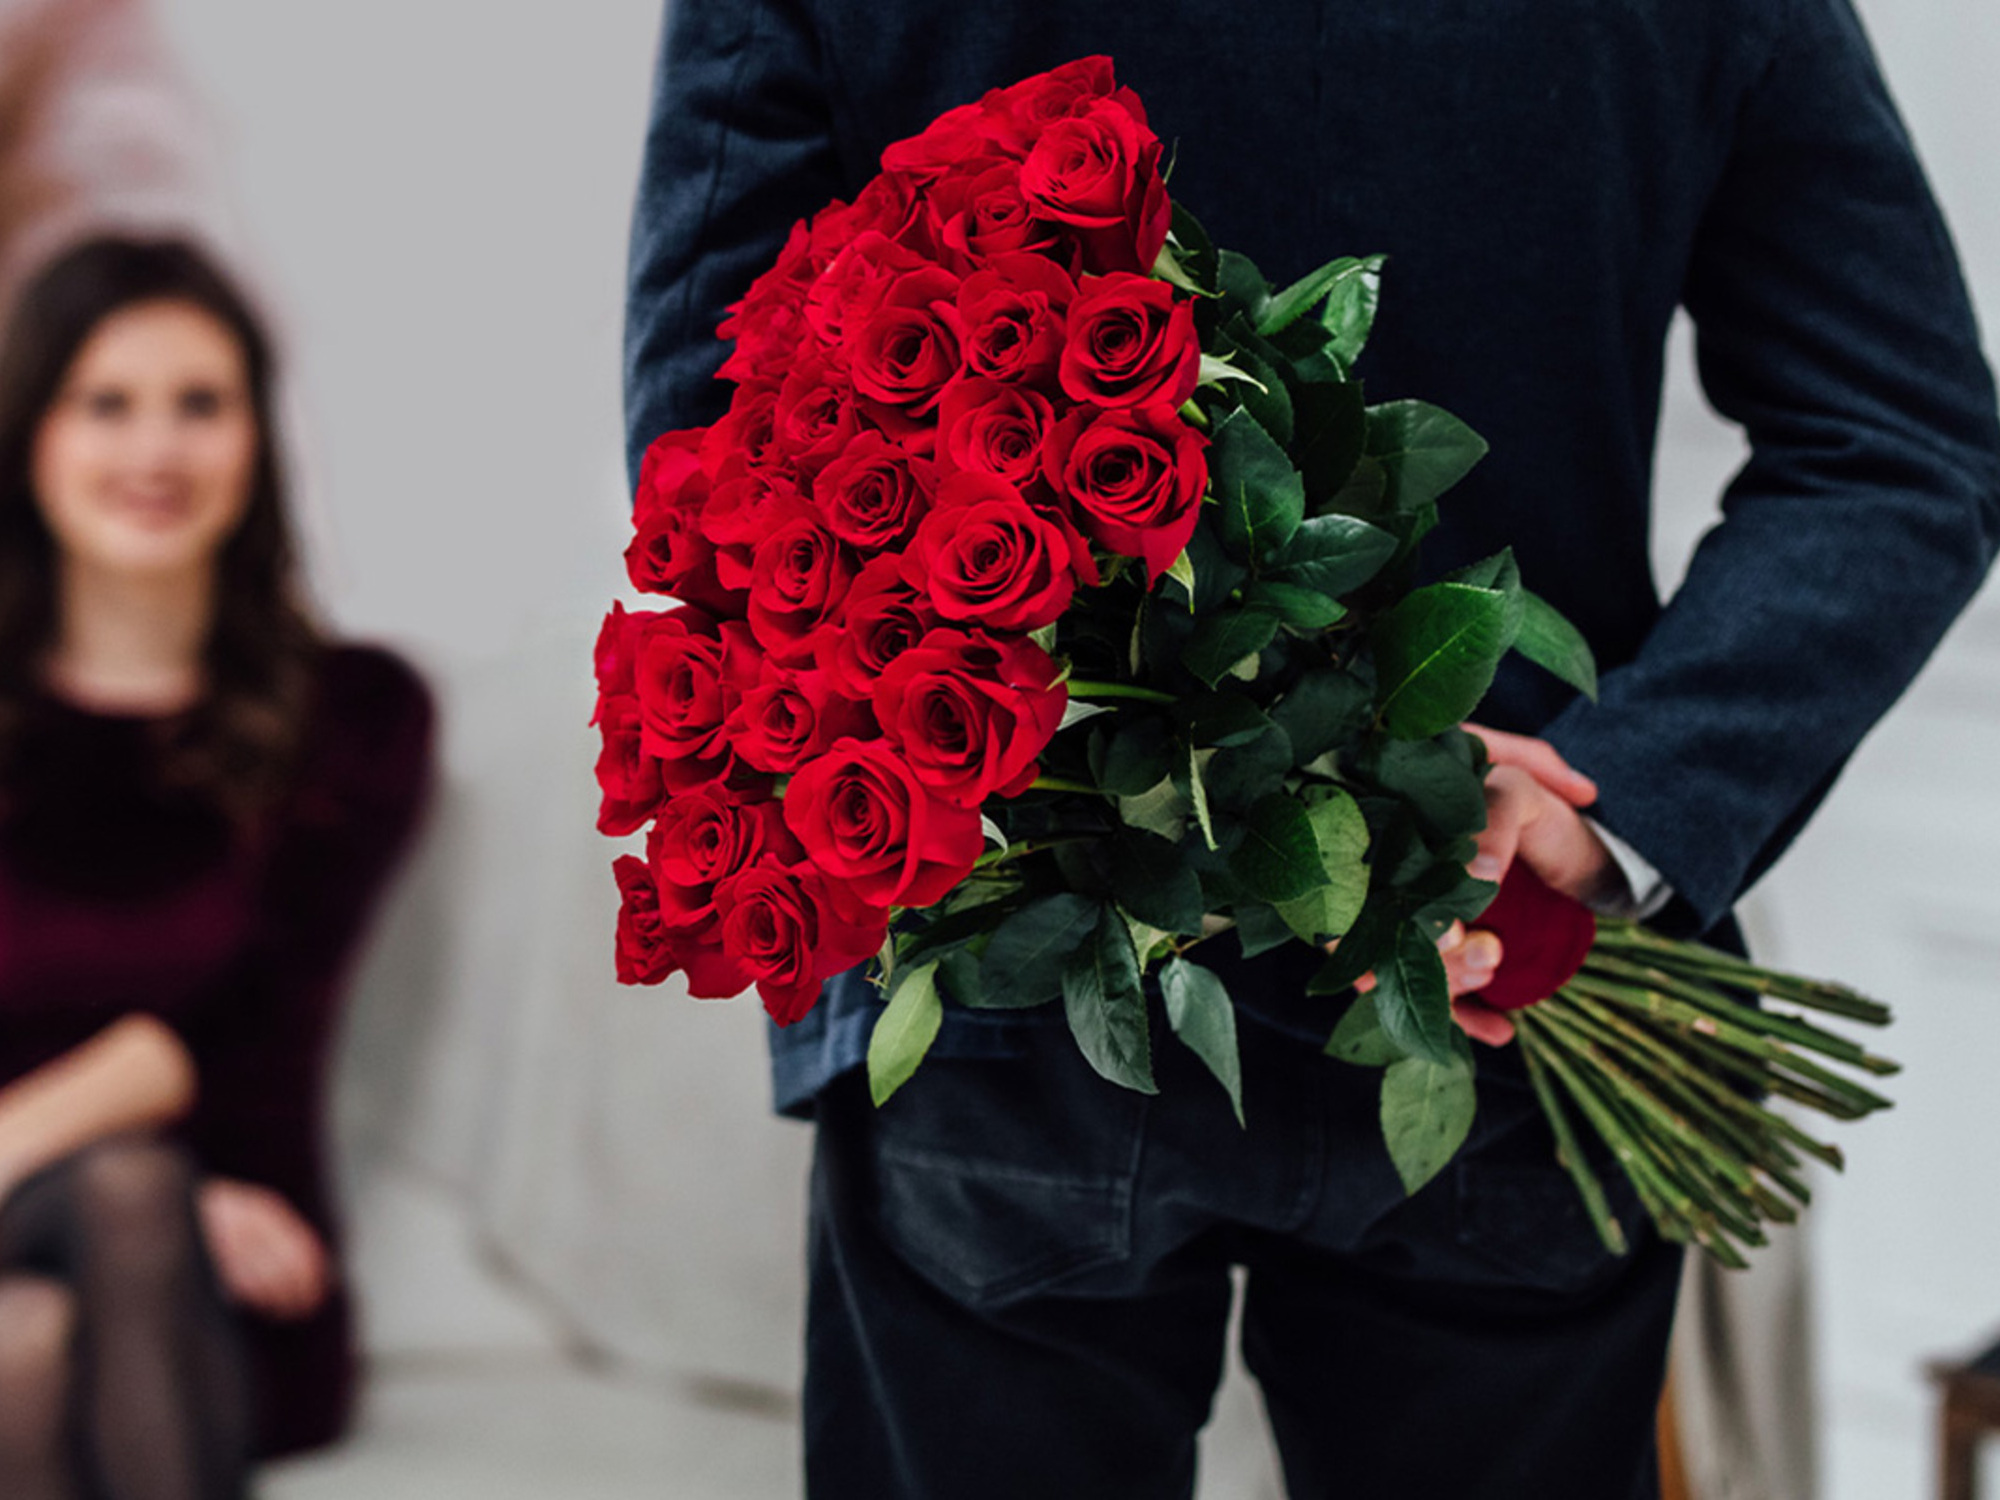 Give your Valentine 2-dozen long-stem roses and a vase for just $49.99